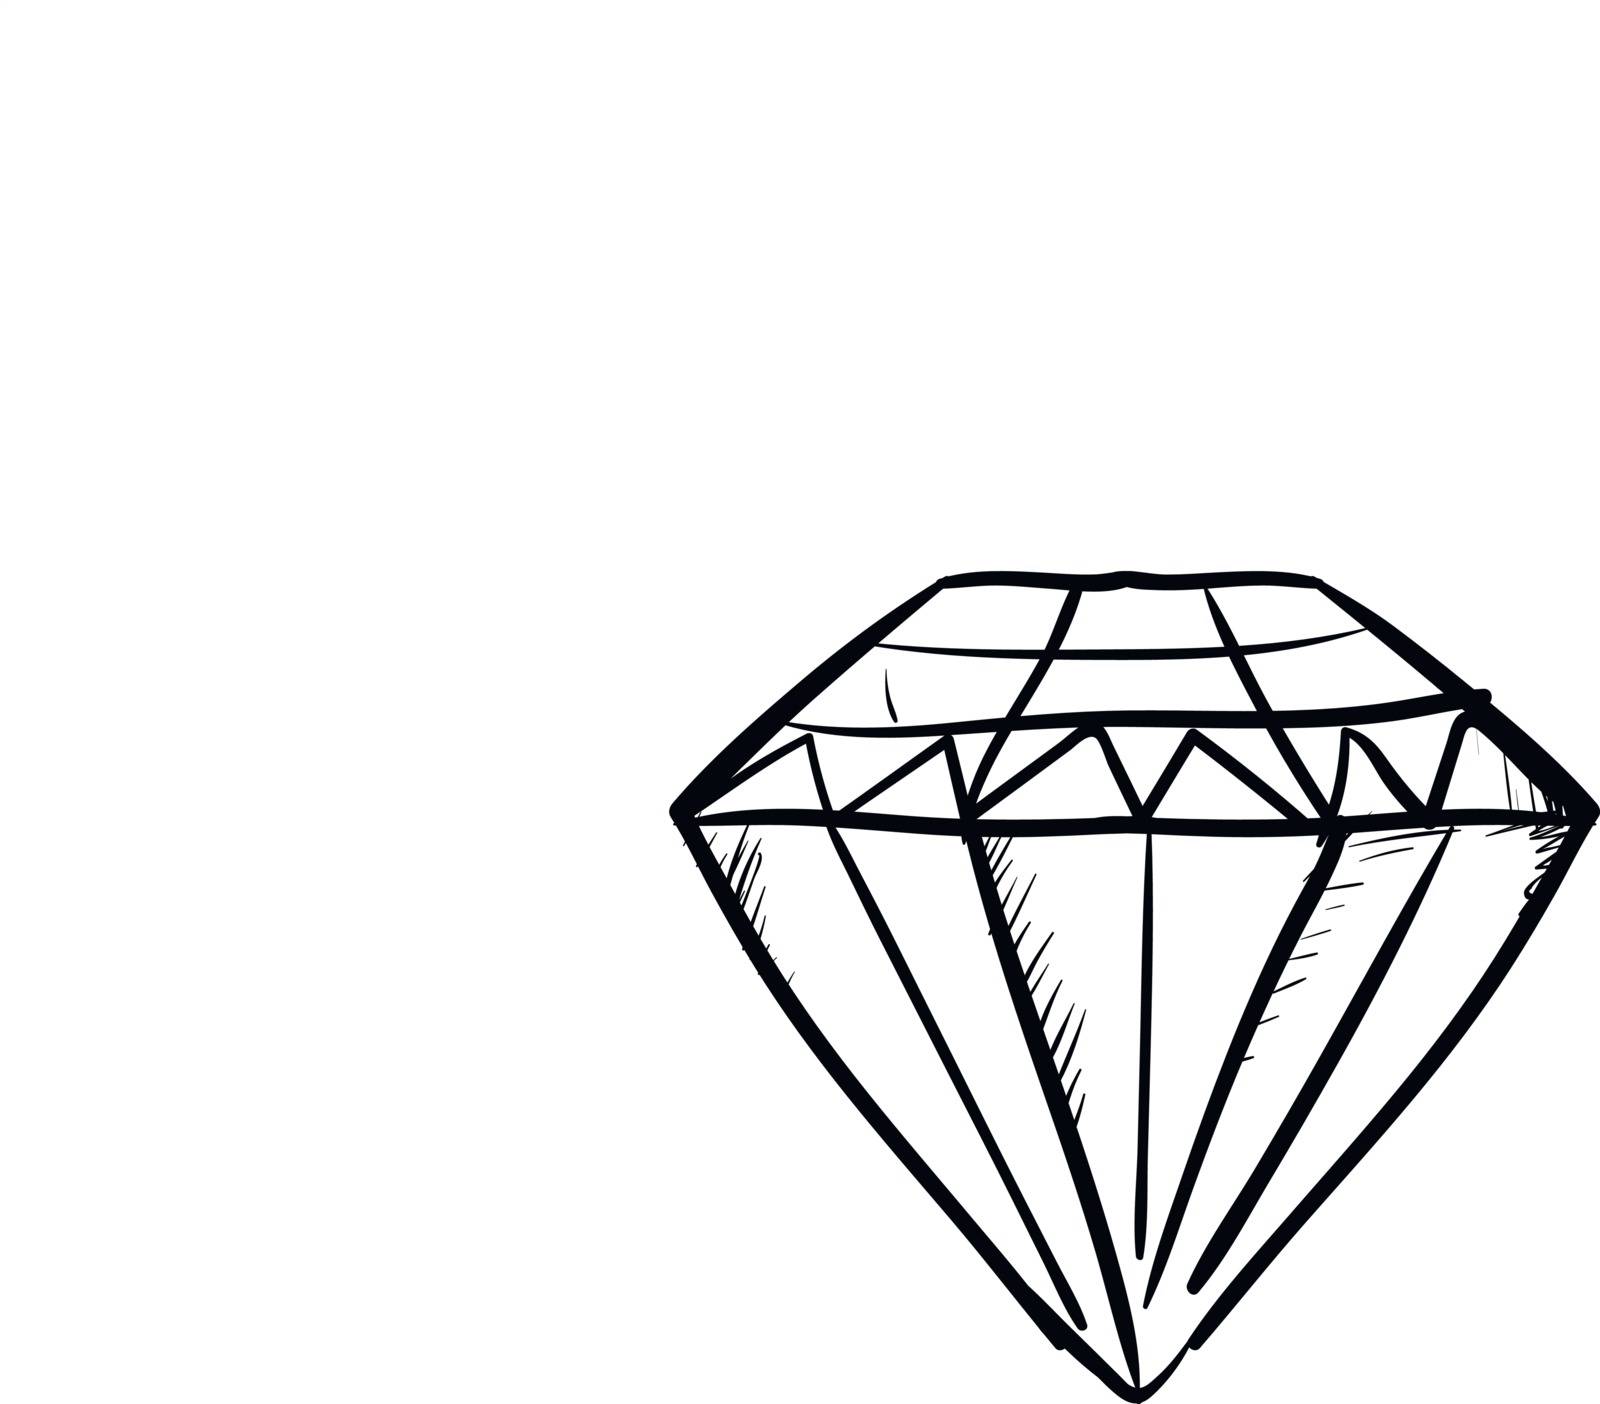 Sketch of a diamond , vector or color illustration by Morphart